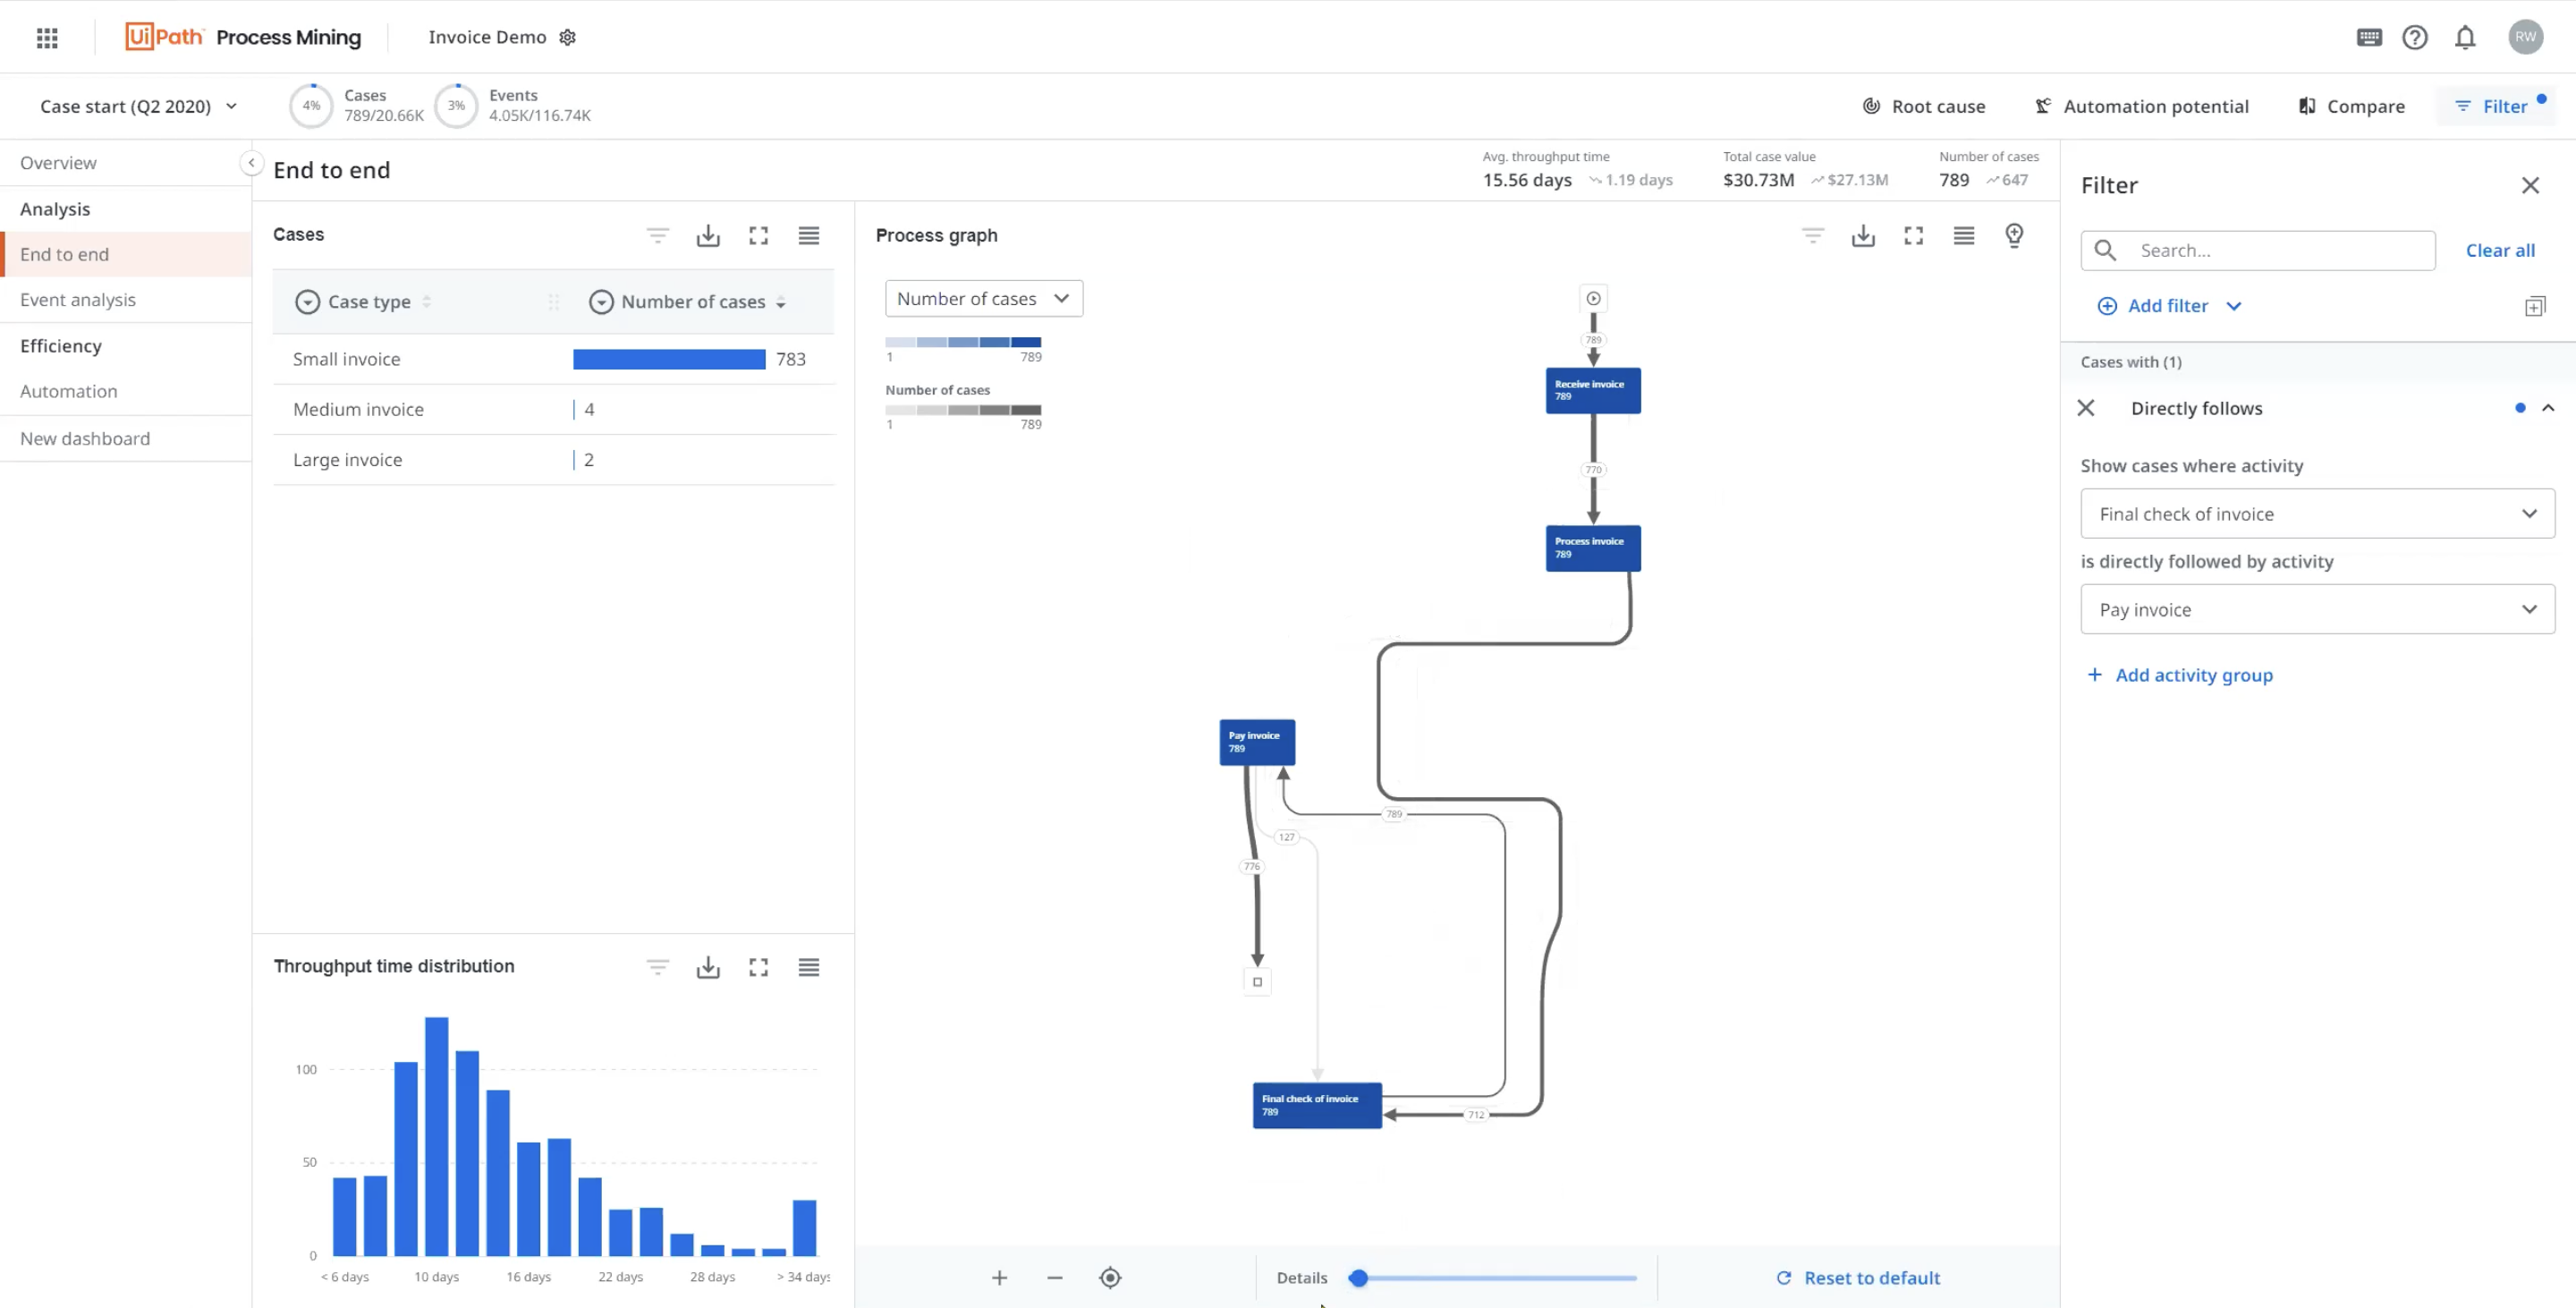 UiPath Process Mining filtering updates August 2022 release